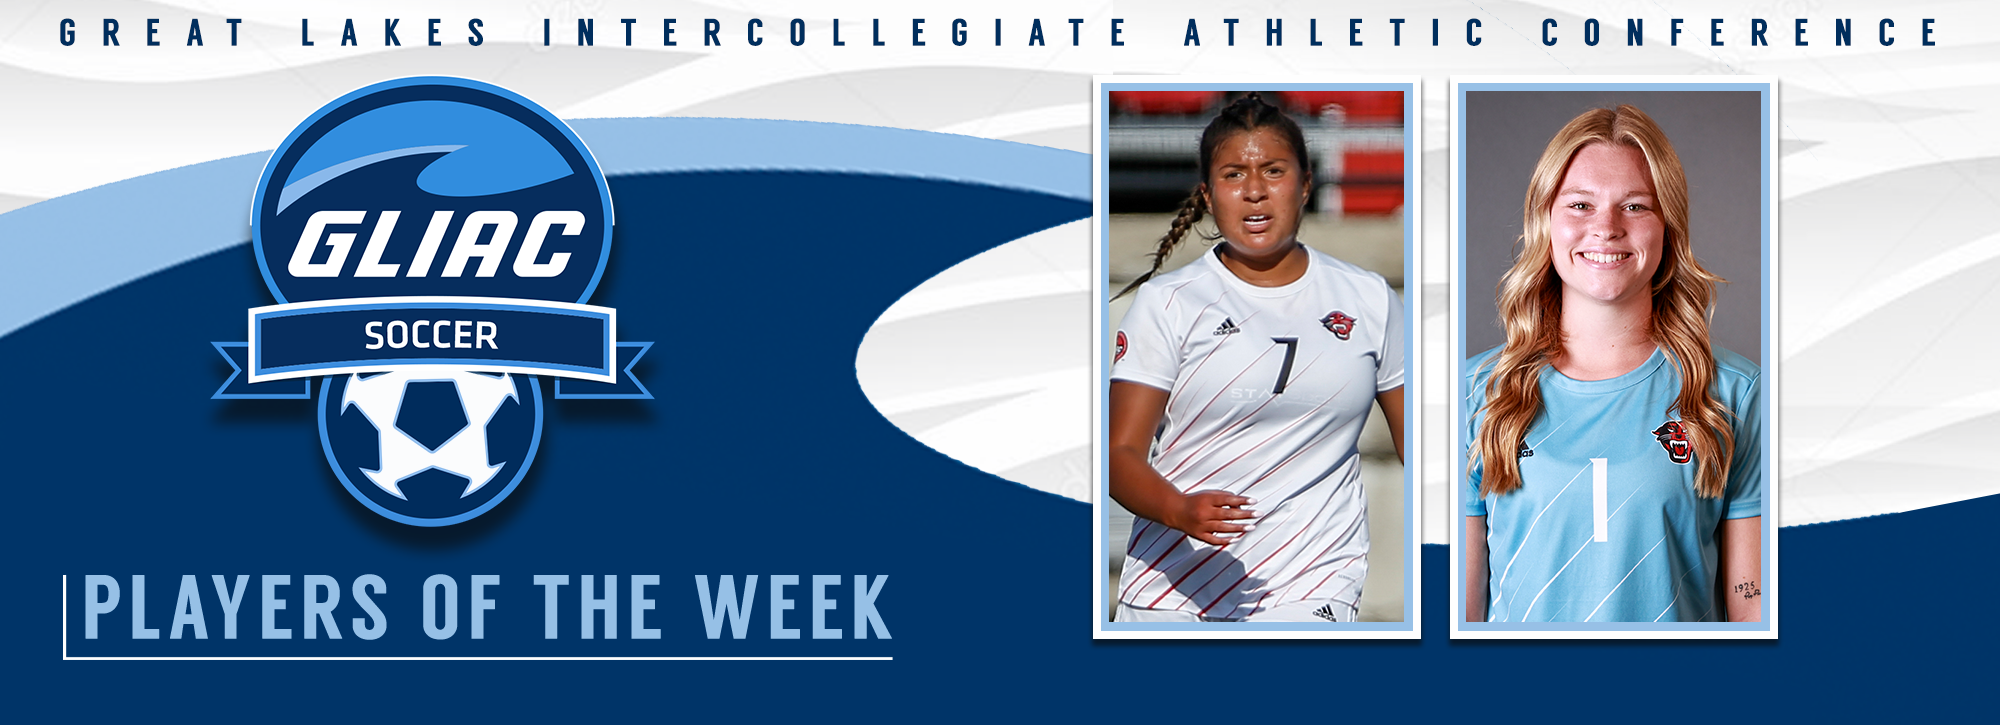 DU's Bosworth and Gauthier recognized with GLIAC women's soccer player of the week honors